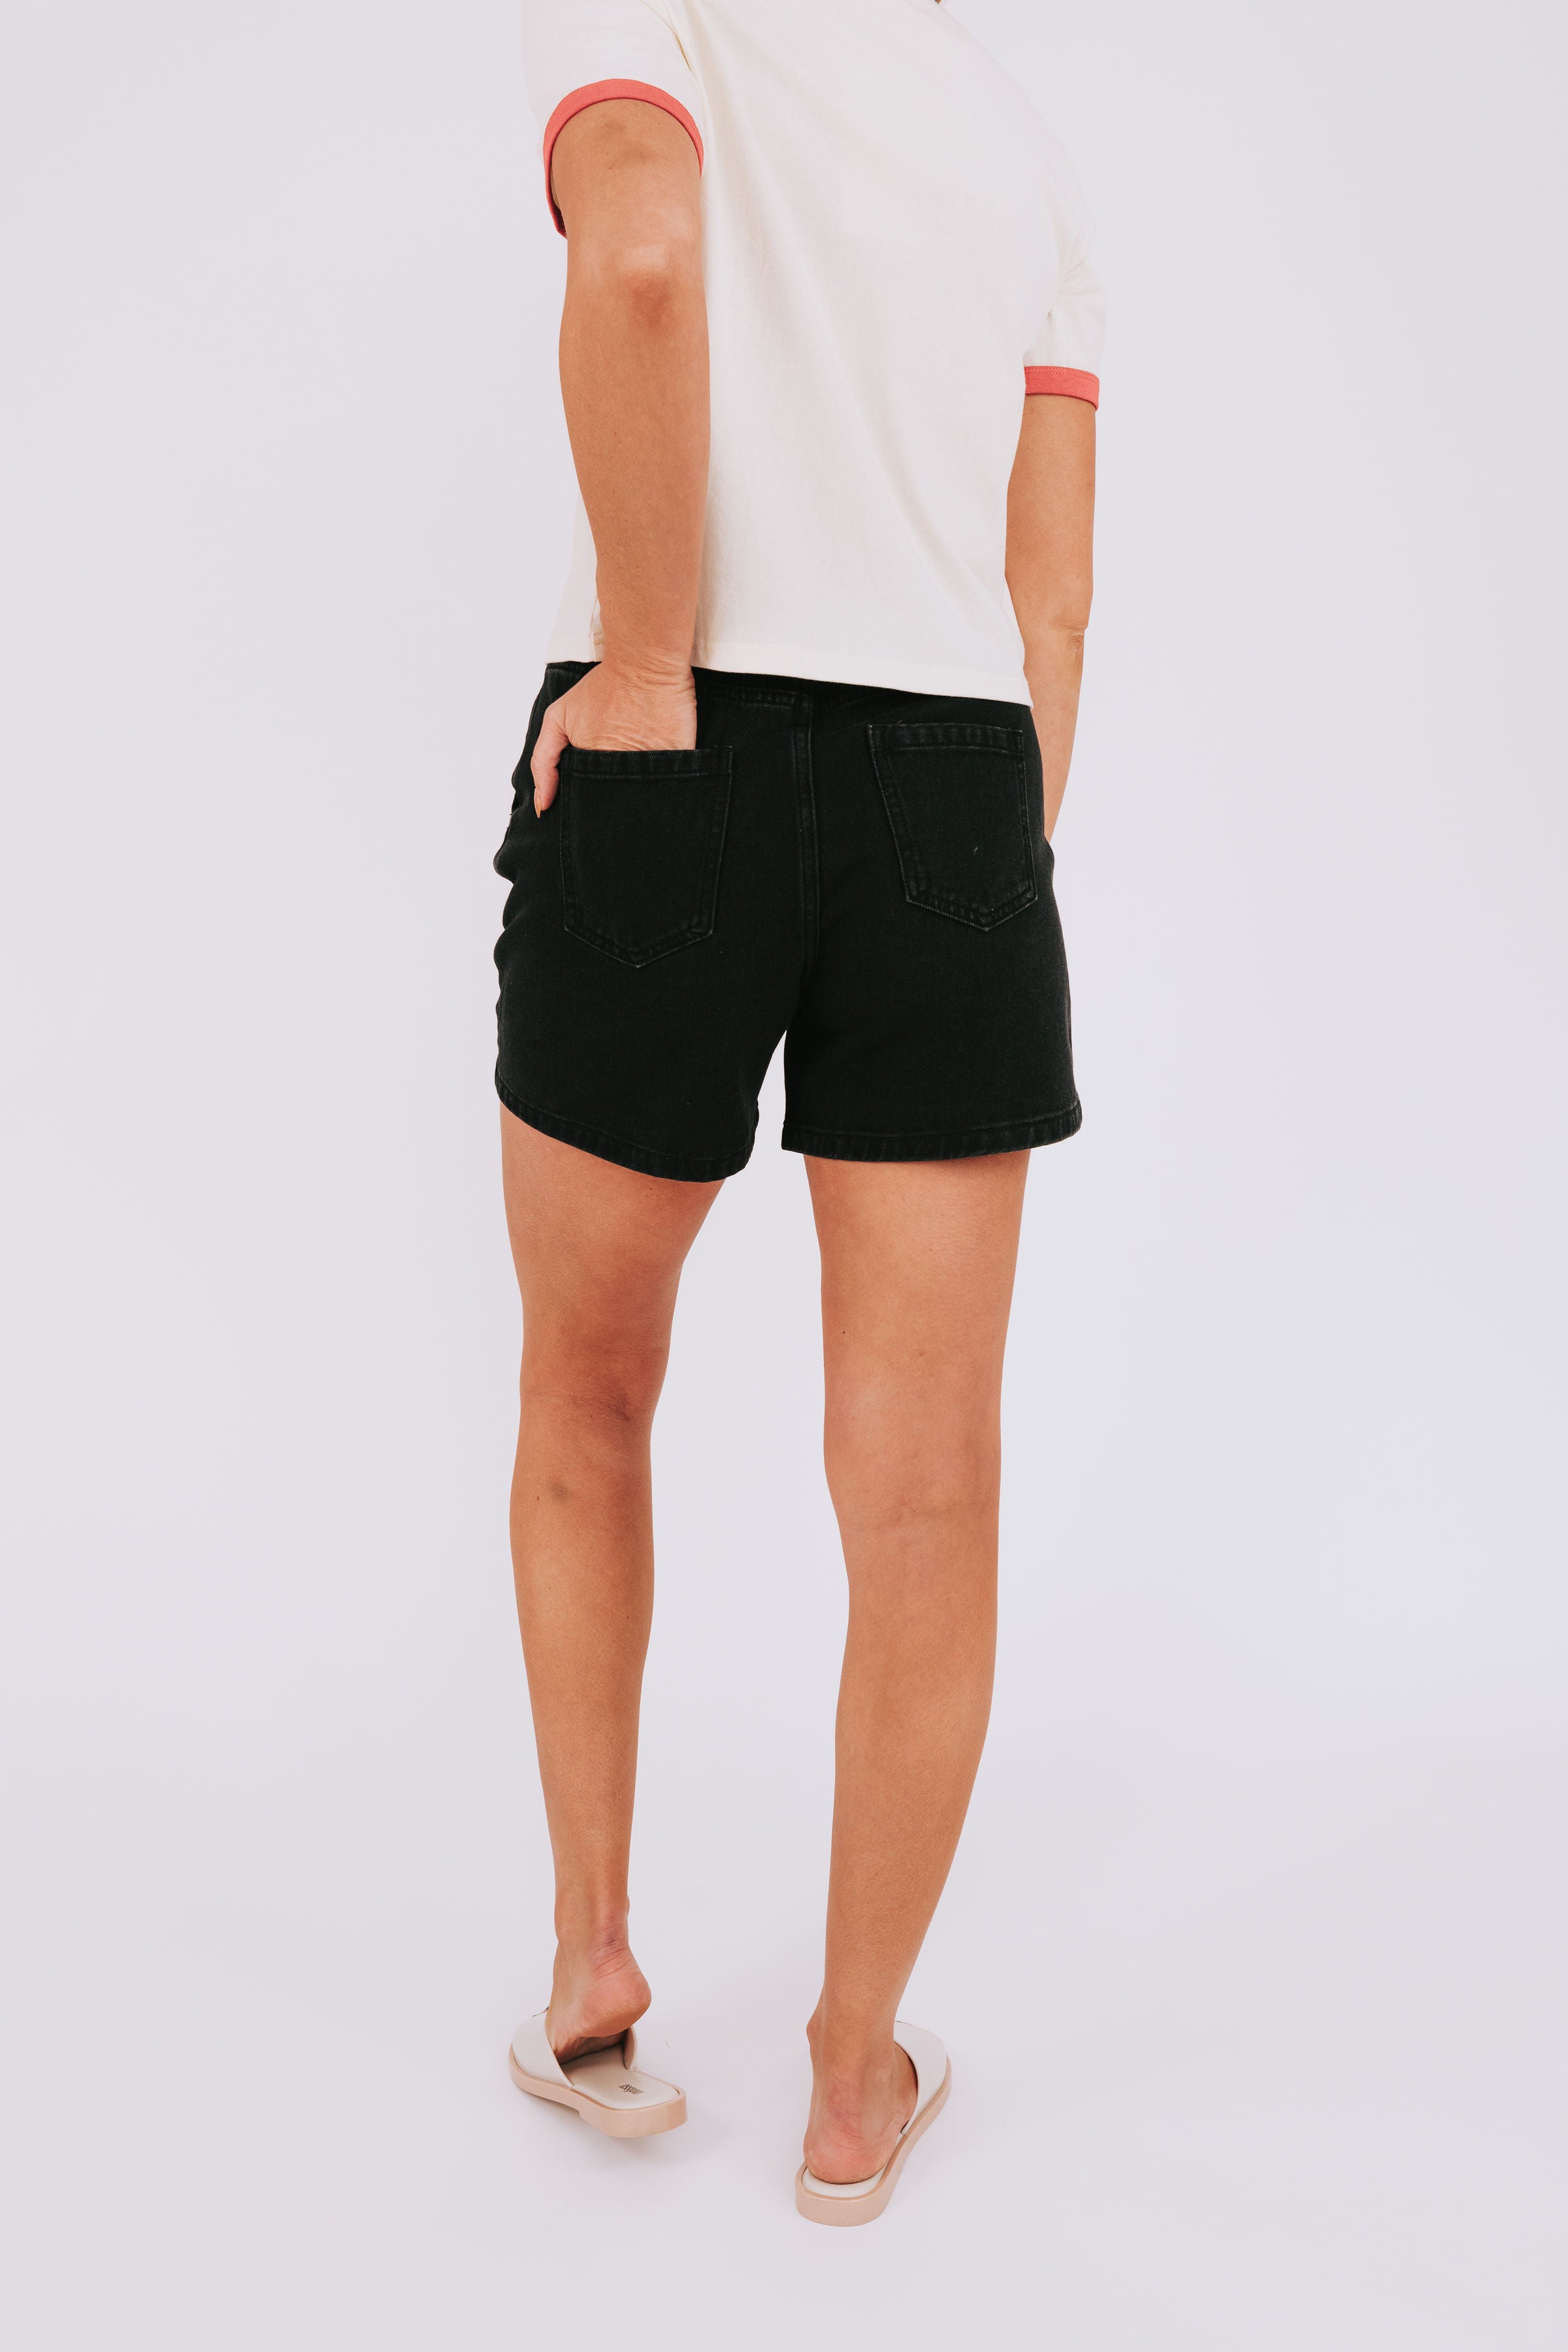 Campground Shorts - 2 Colors!